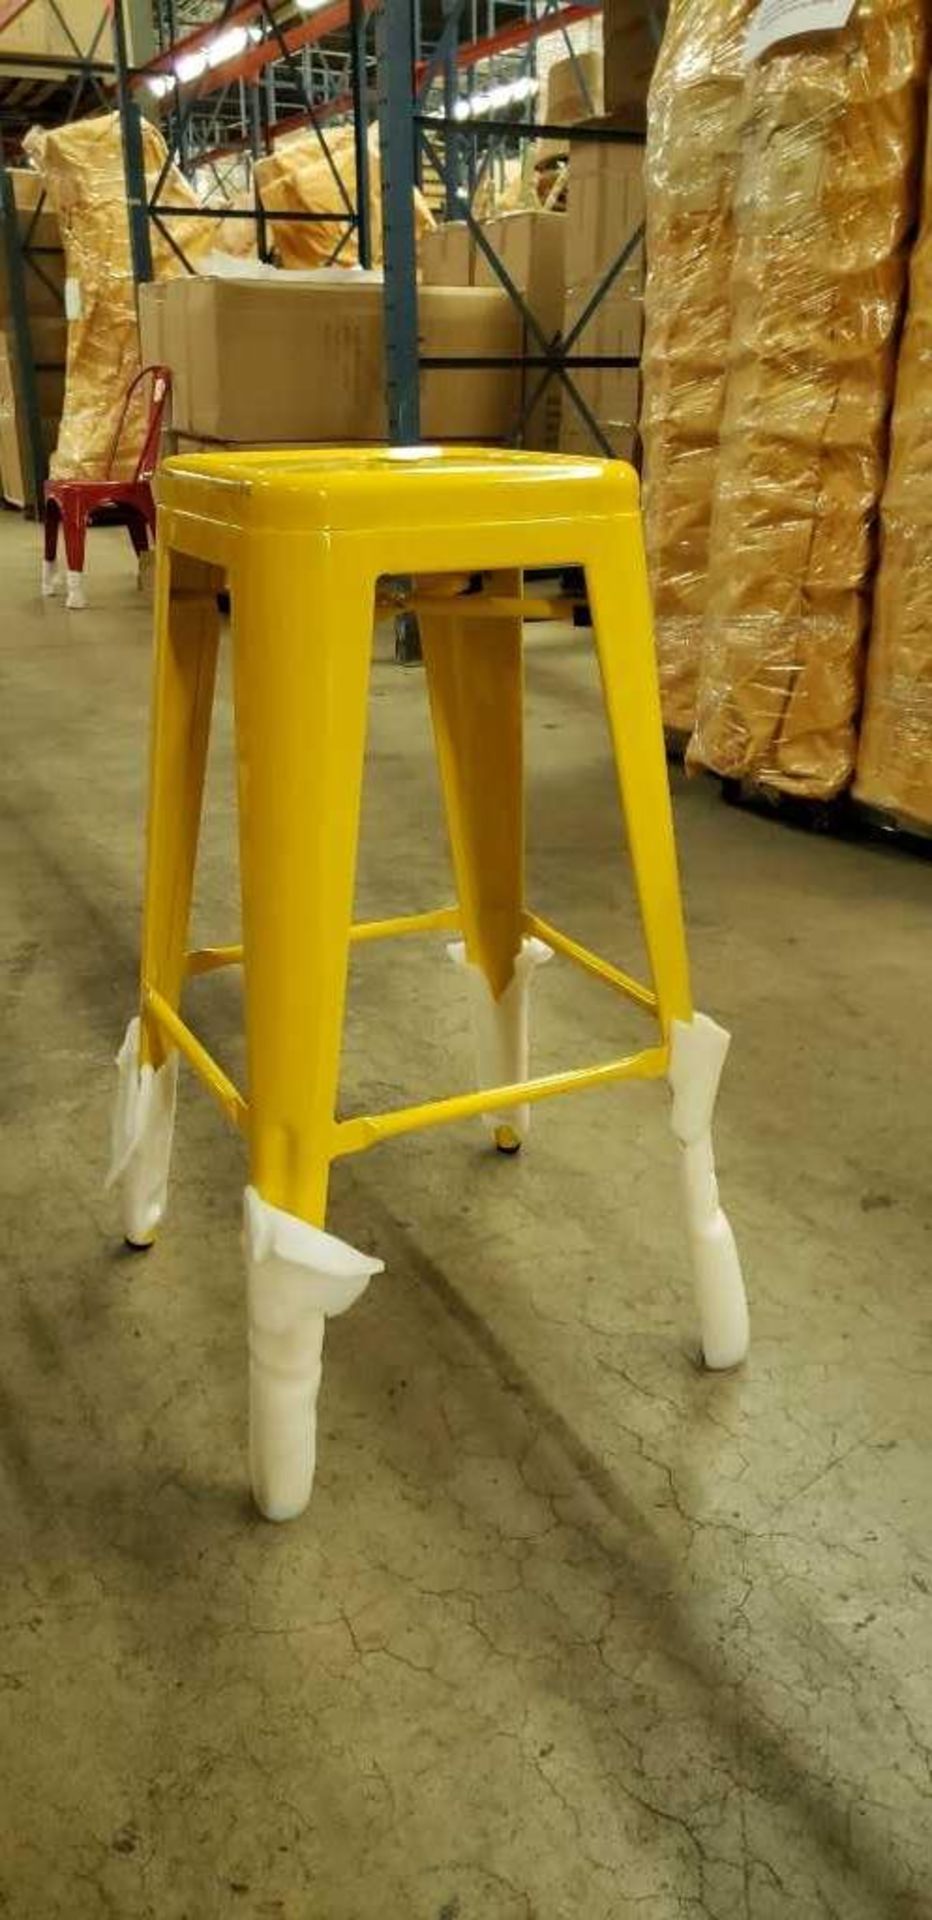 Manhattan Bar stool without back- Yellow, T-5046Y, 9 boxes with 4 each, 36 total - Image 3 of 4